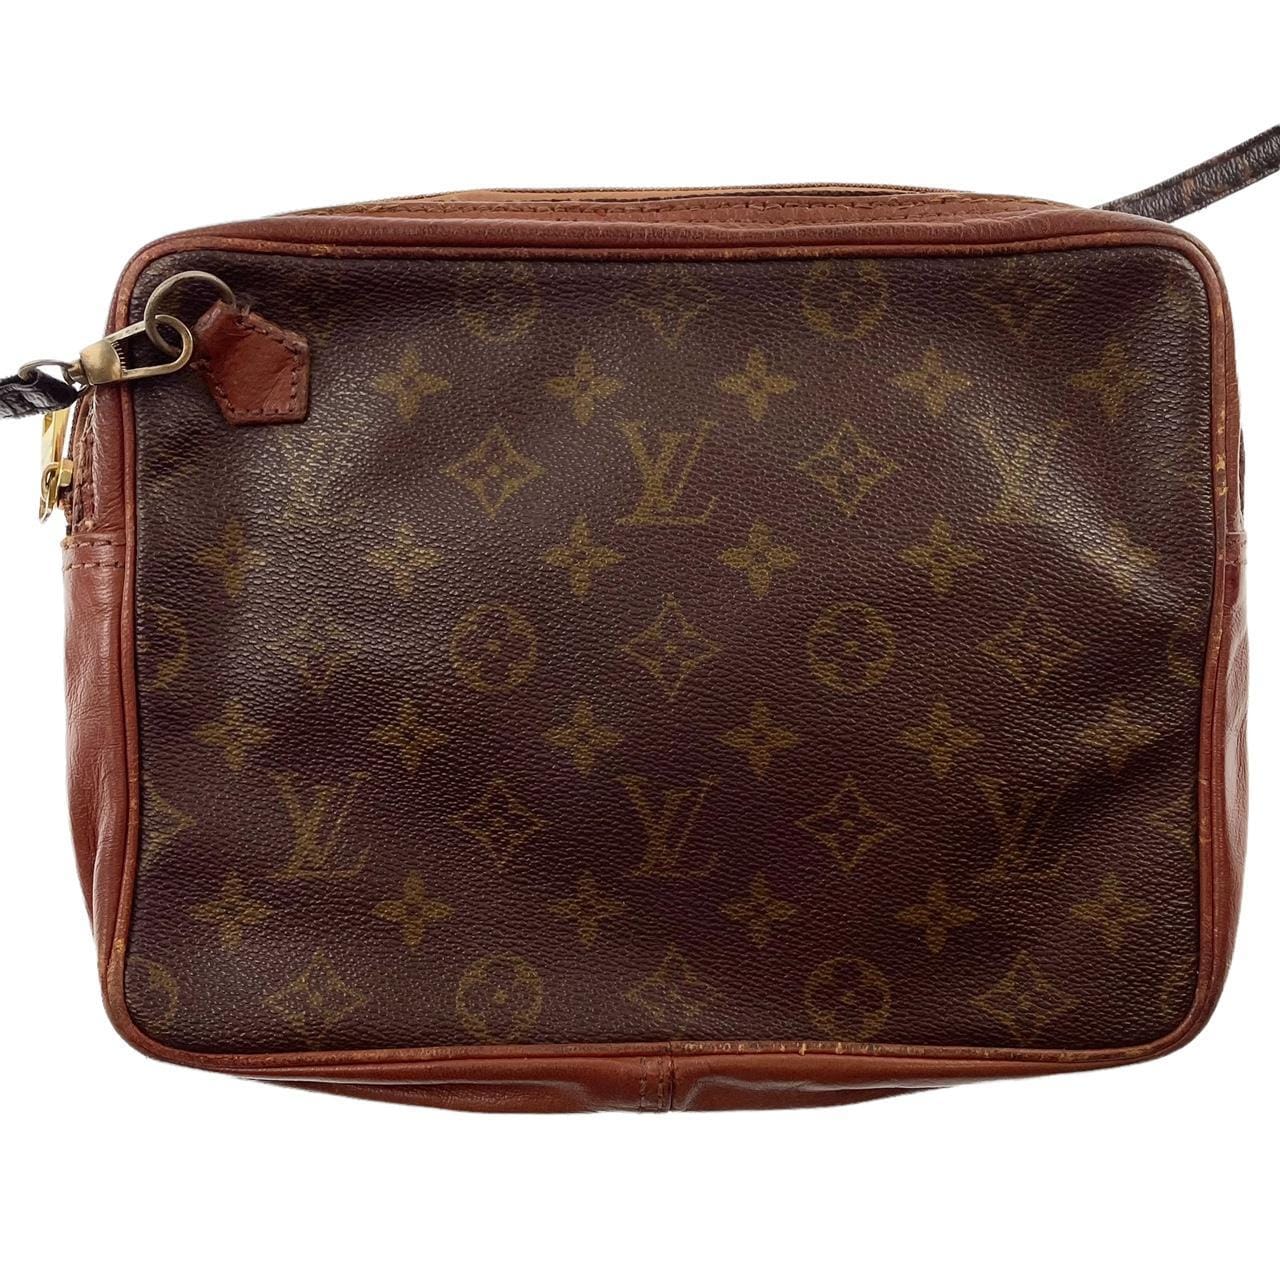 Louis Vuitton Second Hand Bags For Sale Uk